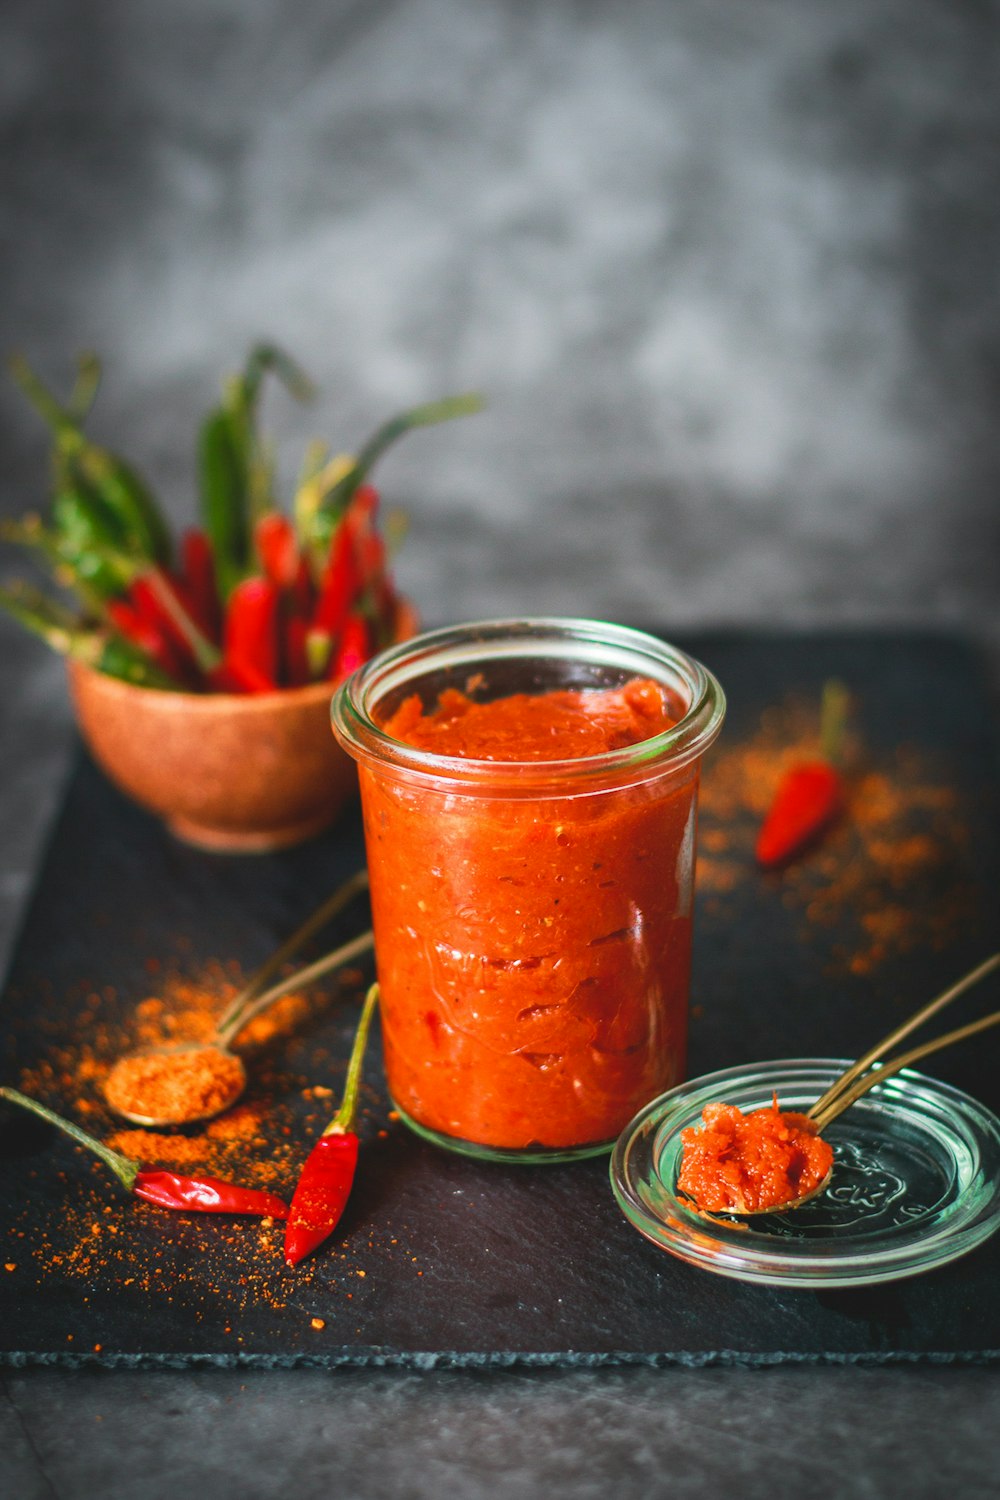 a glass jar filled with red sauce next to a bowl of chili peppers